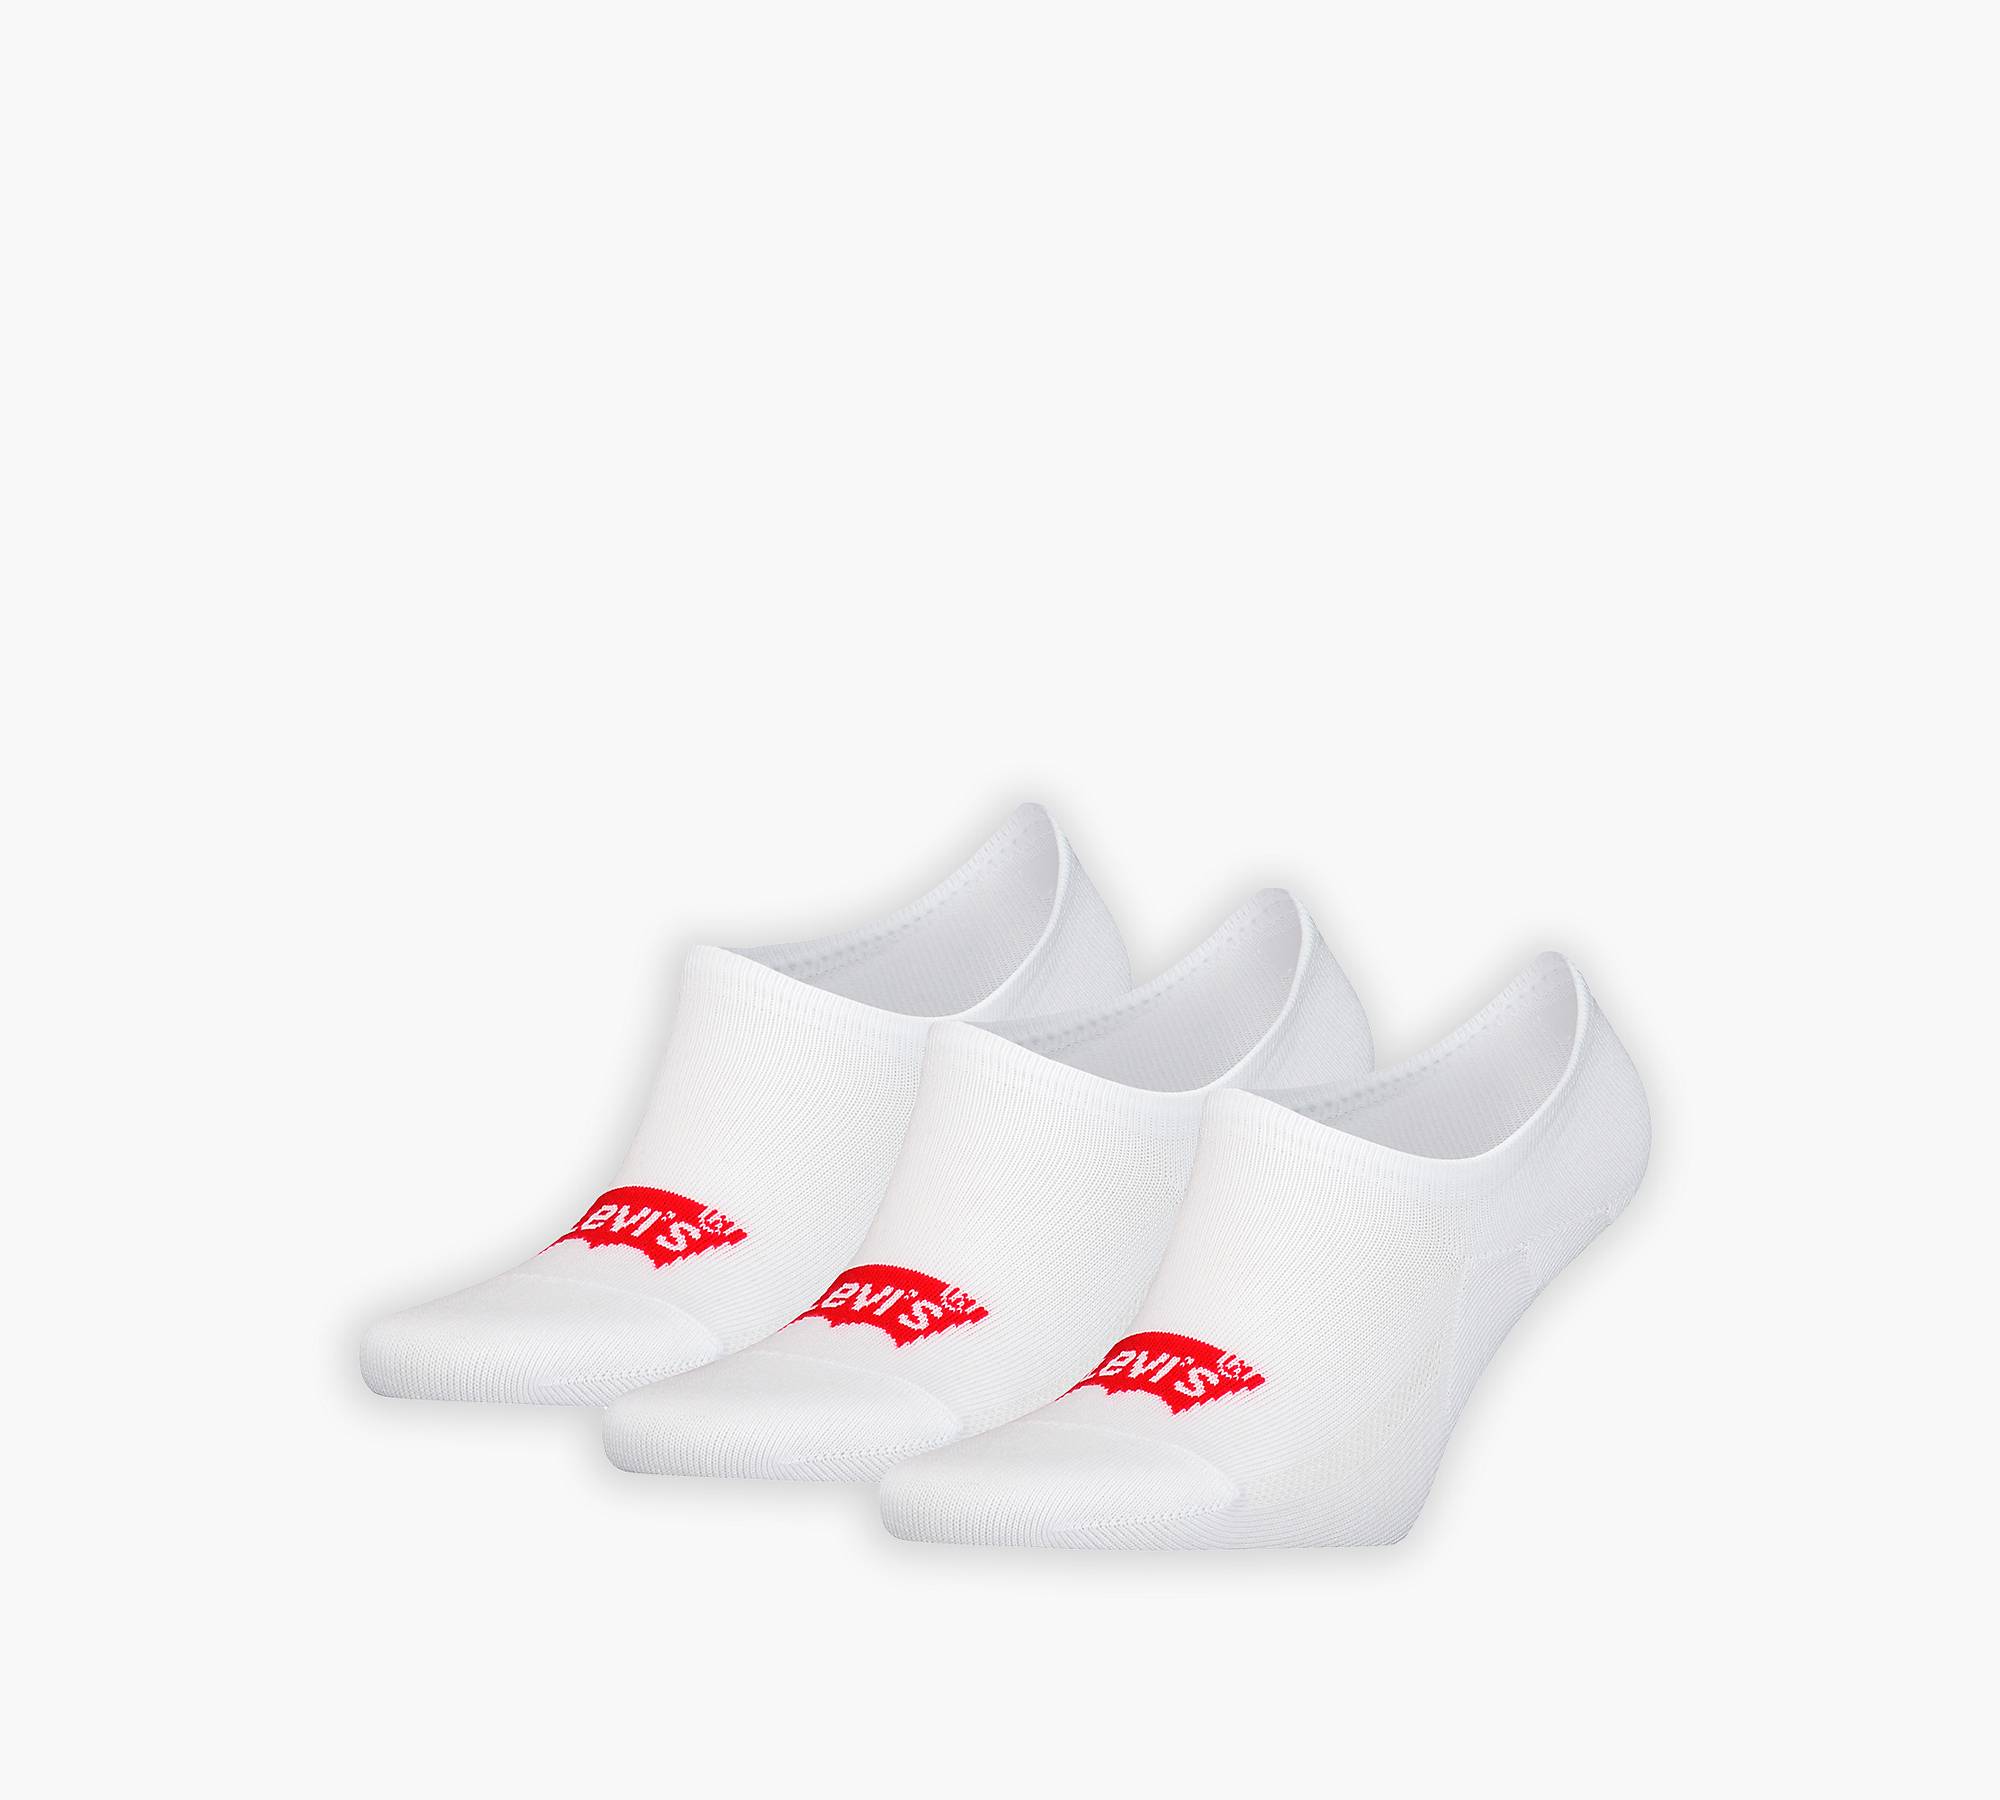 Levi's® High Cut Batwing Logo Recycled Cotton Socks - 3 pack 1